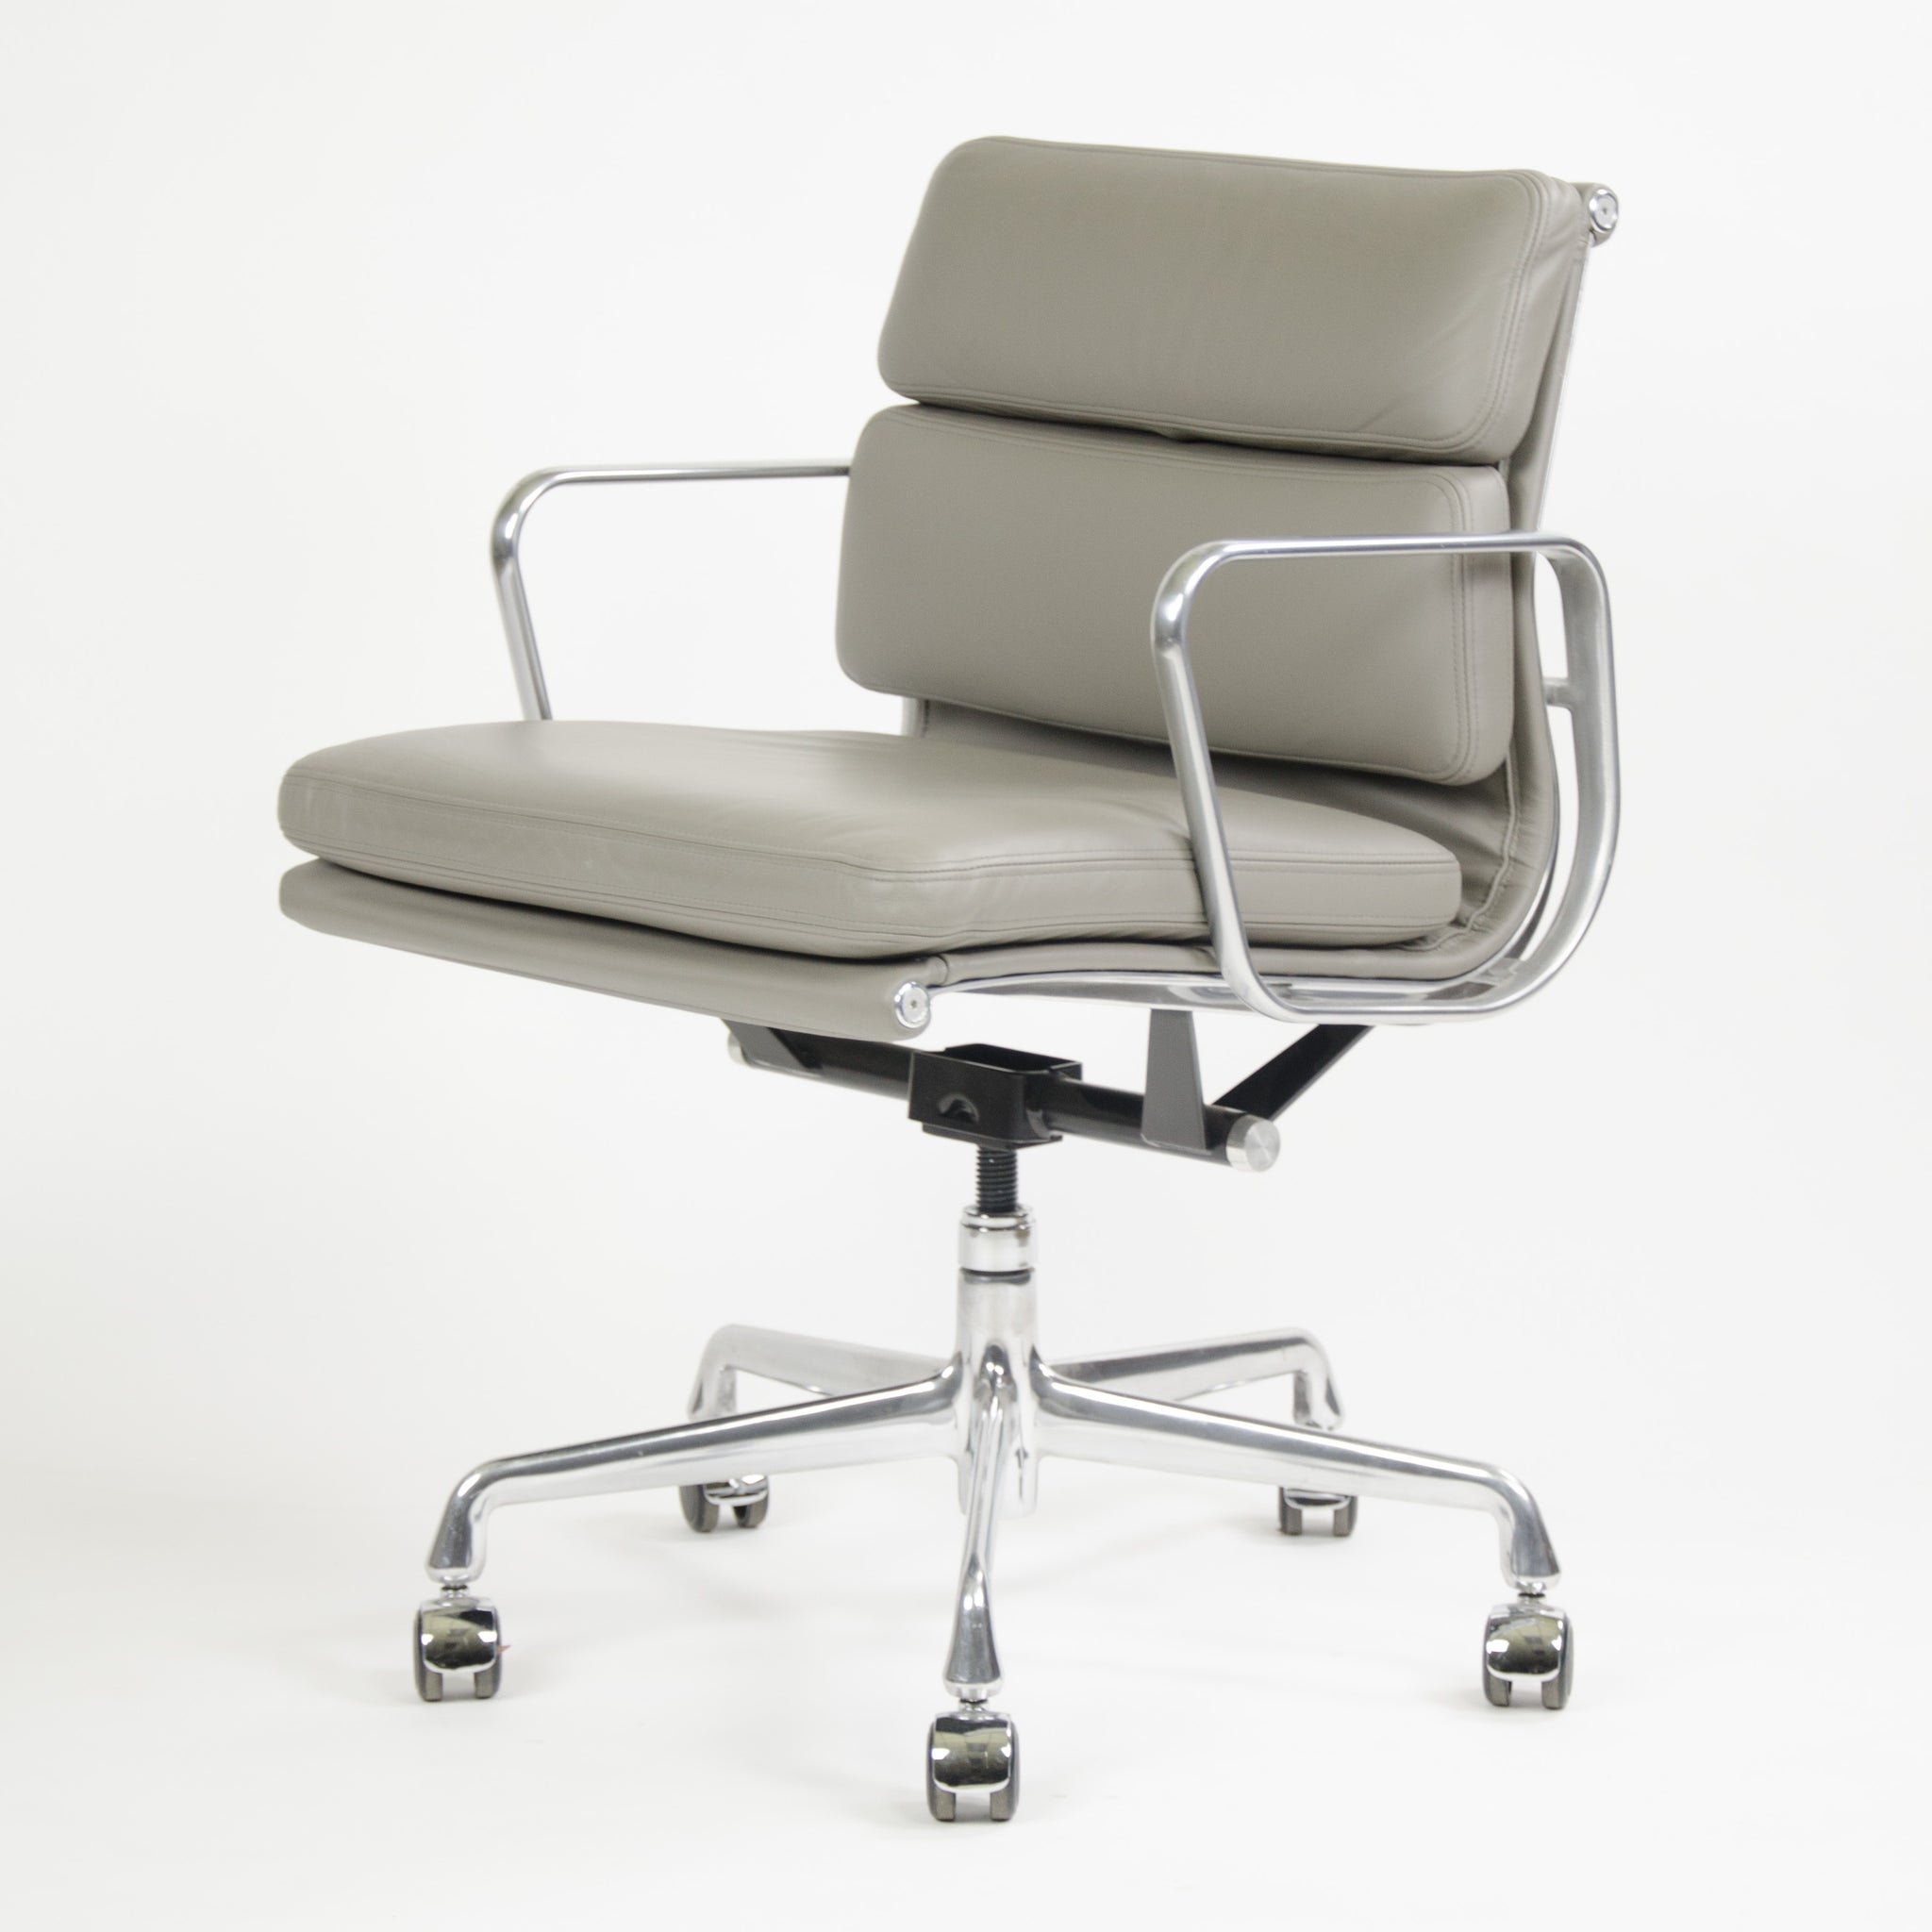 SOLD Herman Miller Eames Soft Pad Aluminum Group Chair Light Gray Leather 2013